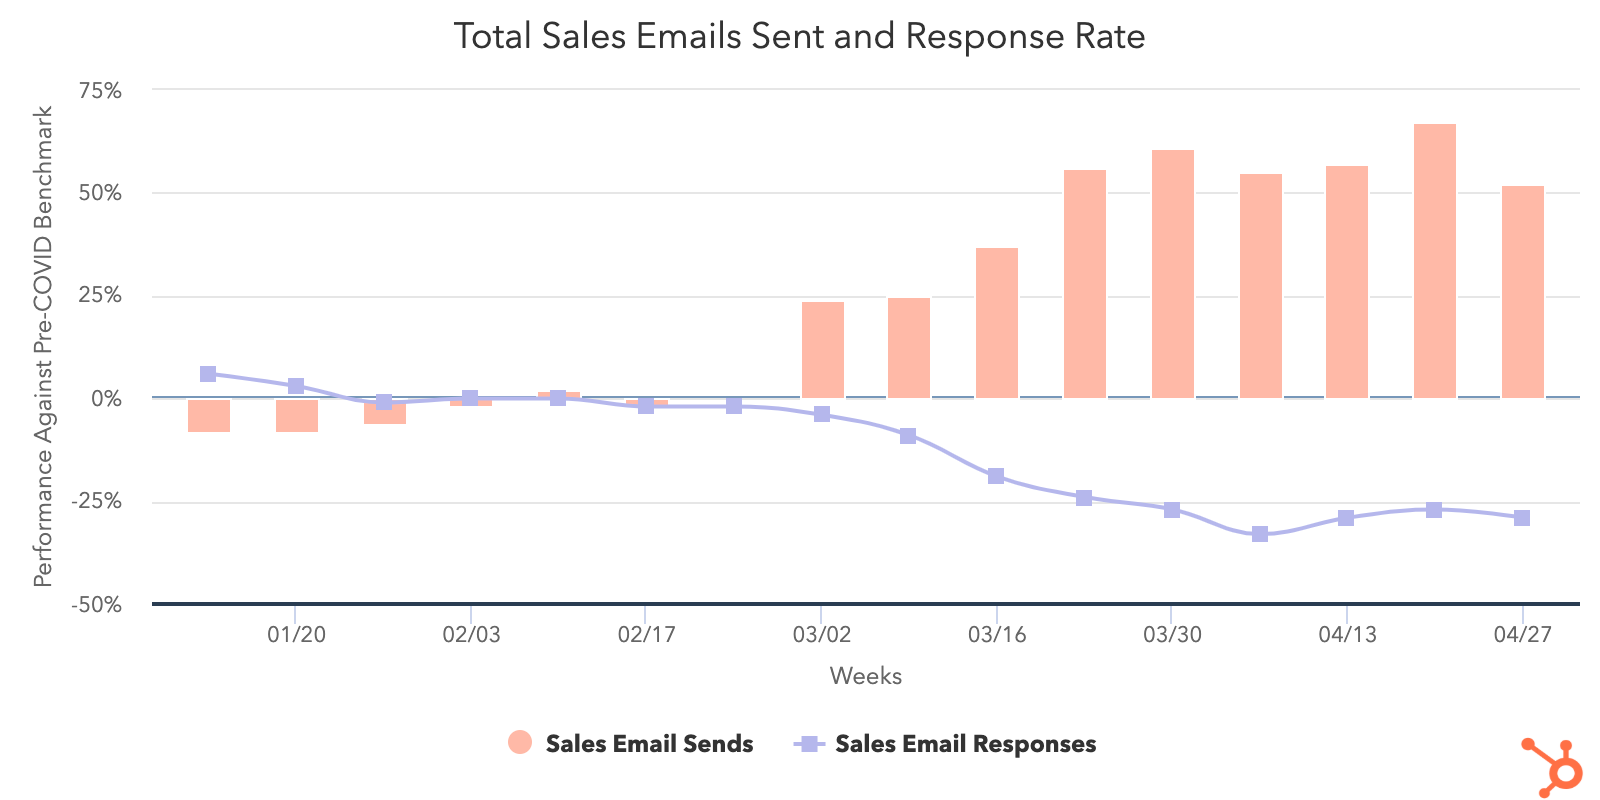 Sales-email-sent-and-response-rate